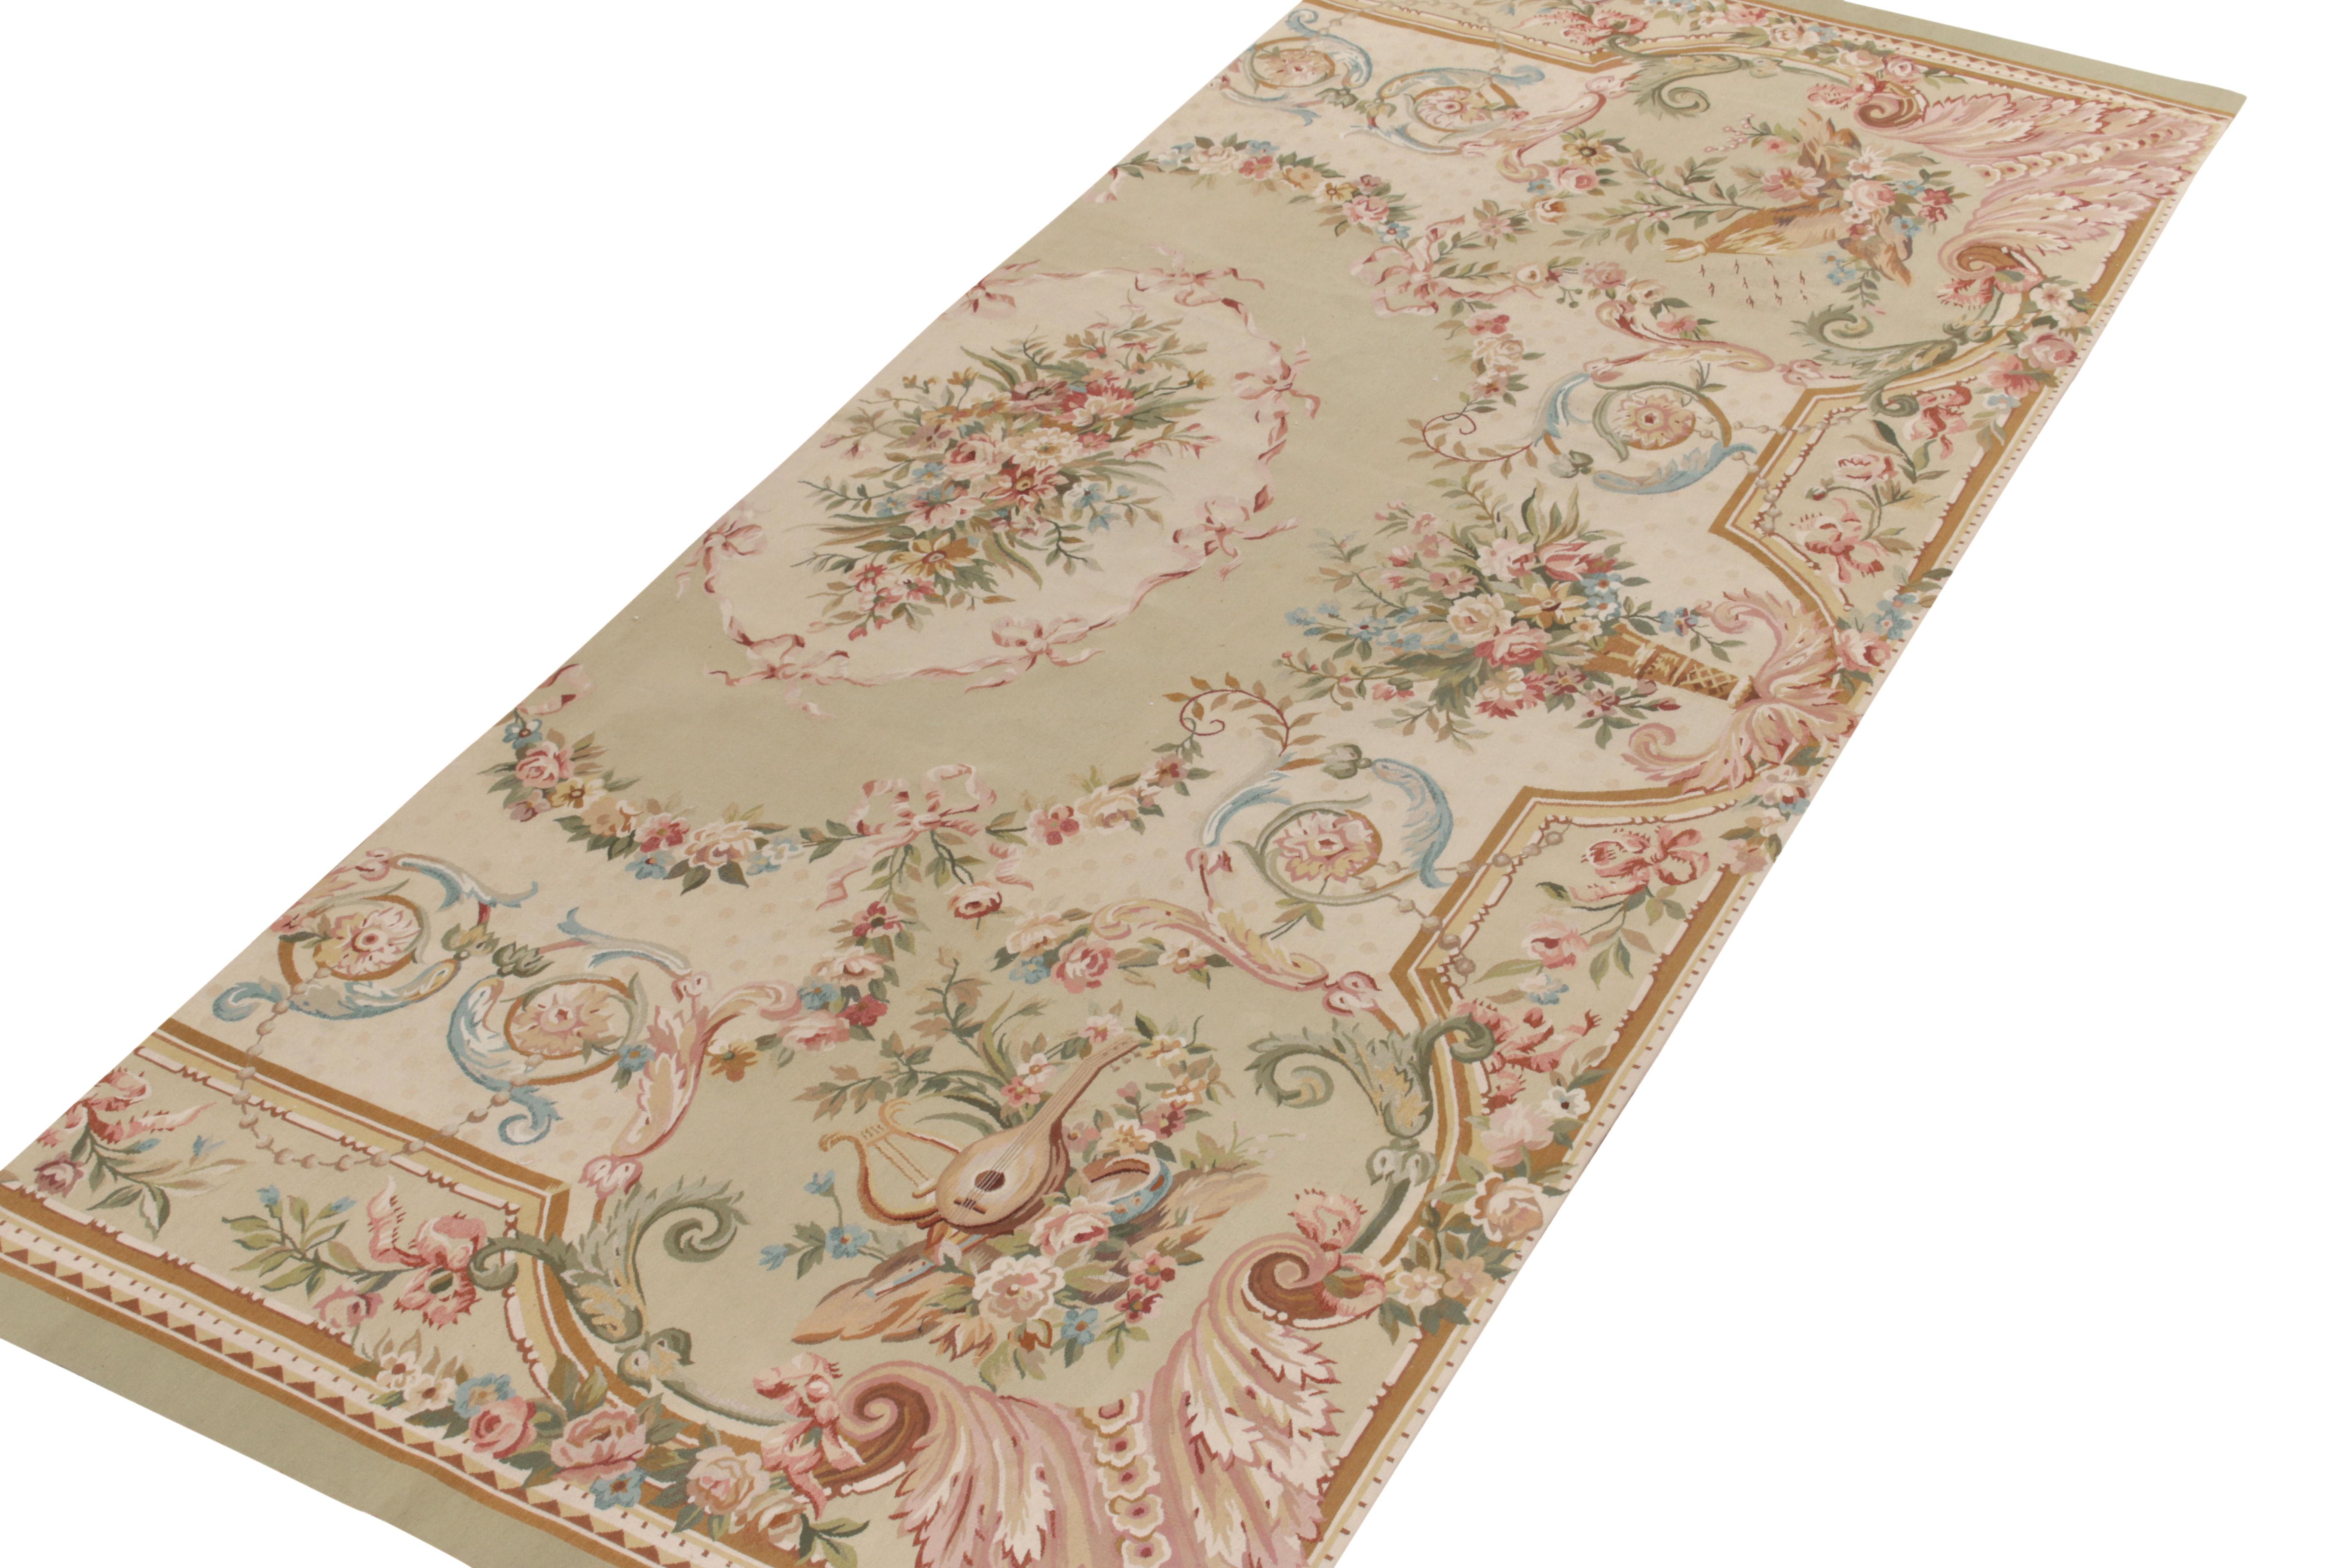 European Rug & Kilim's Handwoven Aubusson Flat Weave Style Green, Pink, Beige Floral Rug For Sale